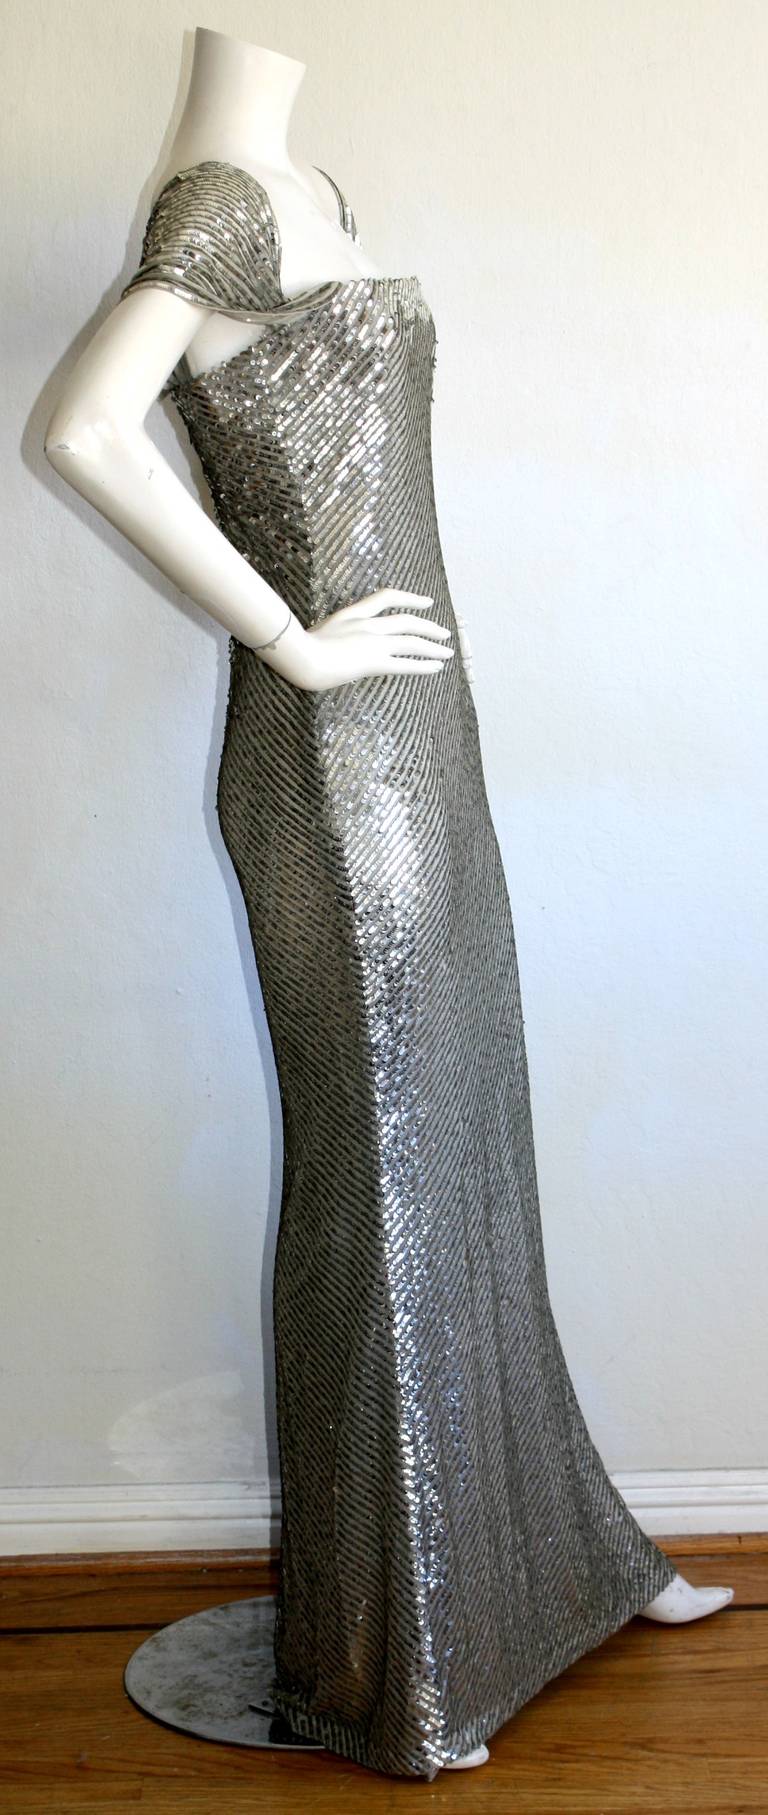 Bill Blass Haute Couture Silver Sequin Vintage Mermaid Gown New w/ Tags $7, 250 1